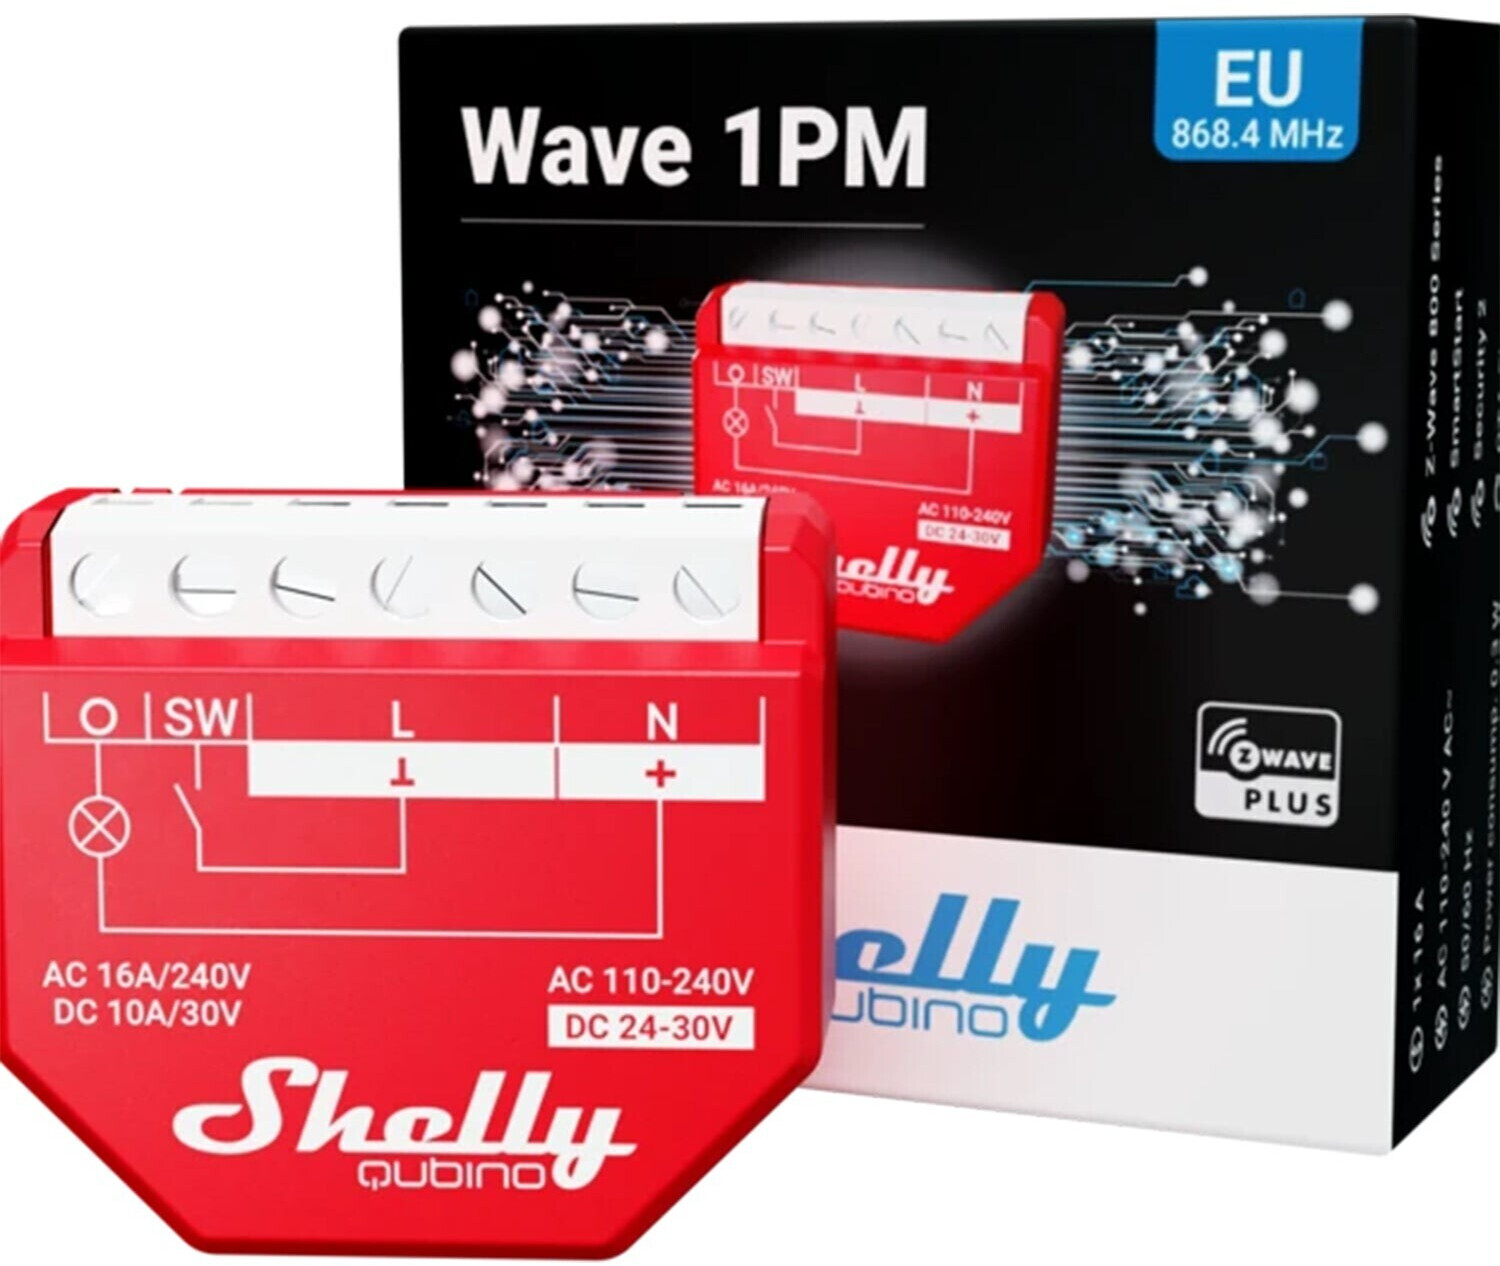 SHELLY WAVE 2PM: Shelly Qubino Wave 2PM, Relais, max 16A, 2 Kanal